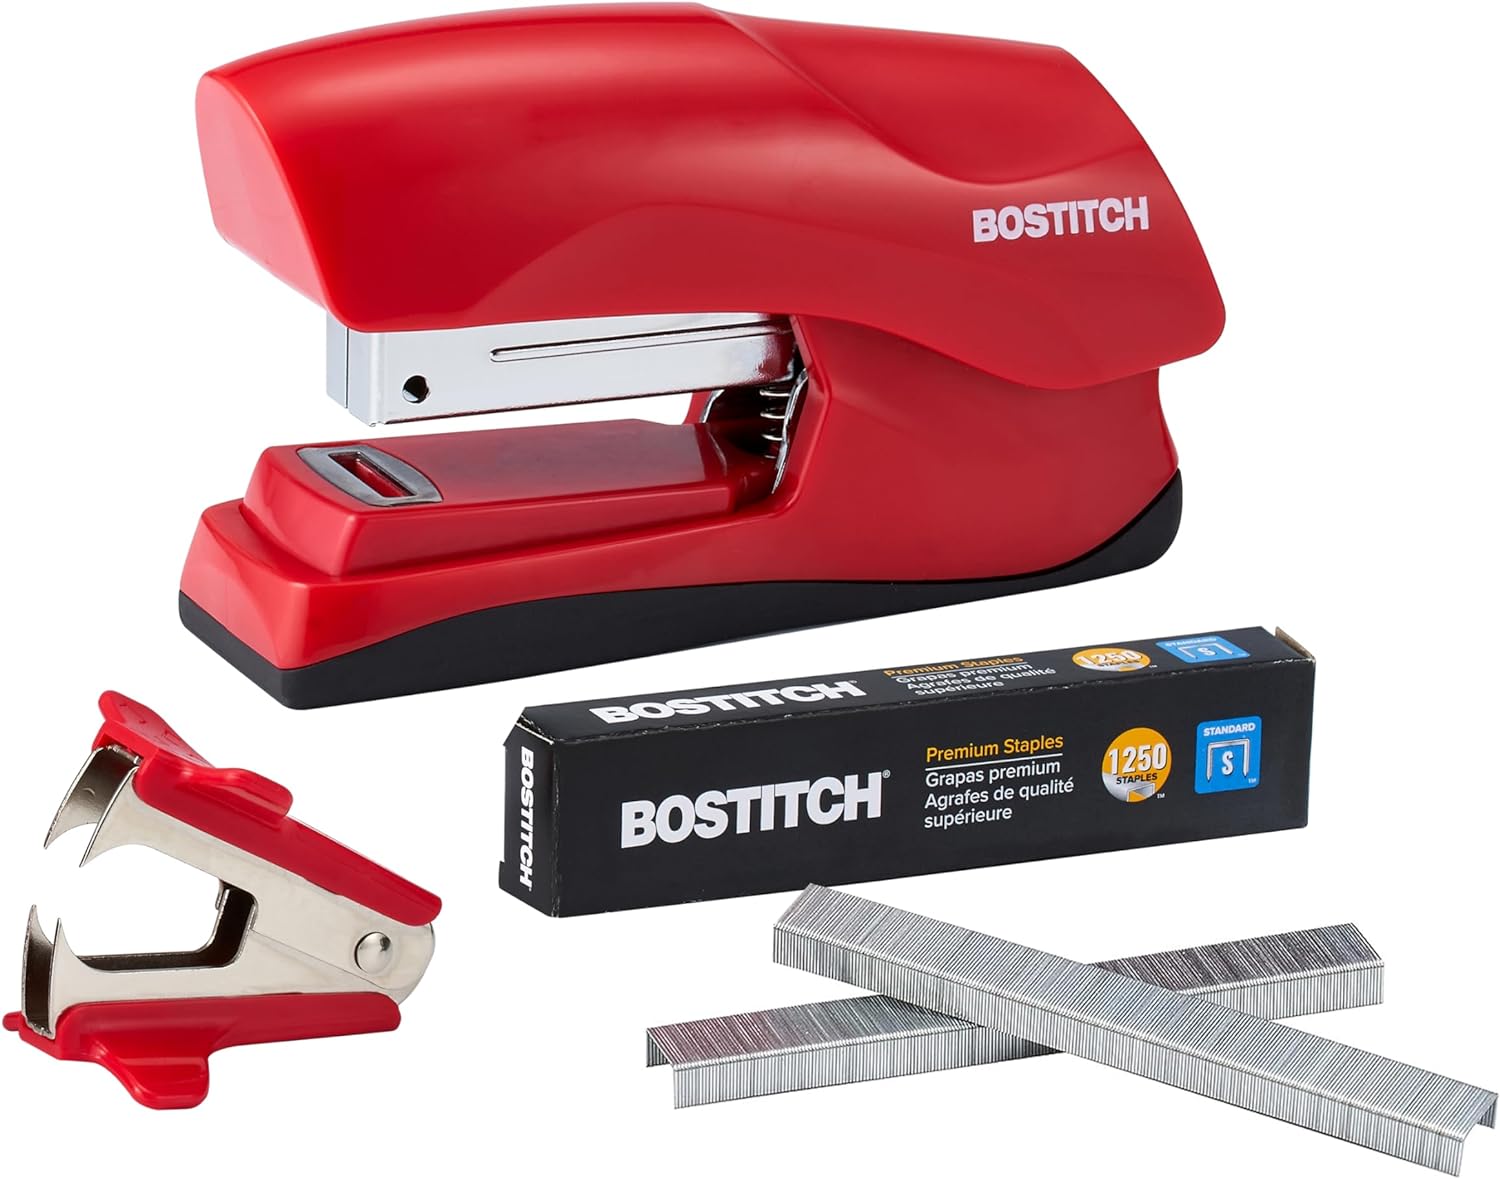 Bostitch Office Heavy Duty 40 Sheet Stapler with 1250 Staples & Claw Remover, Small Stapler Size, Fits into the Palm of Your Hand, Value Pack, Red (B175-RED-VP)